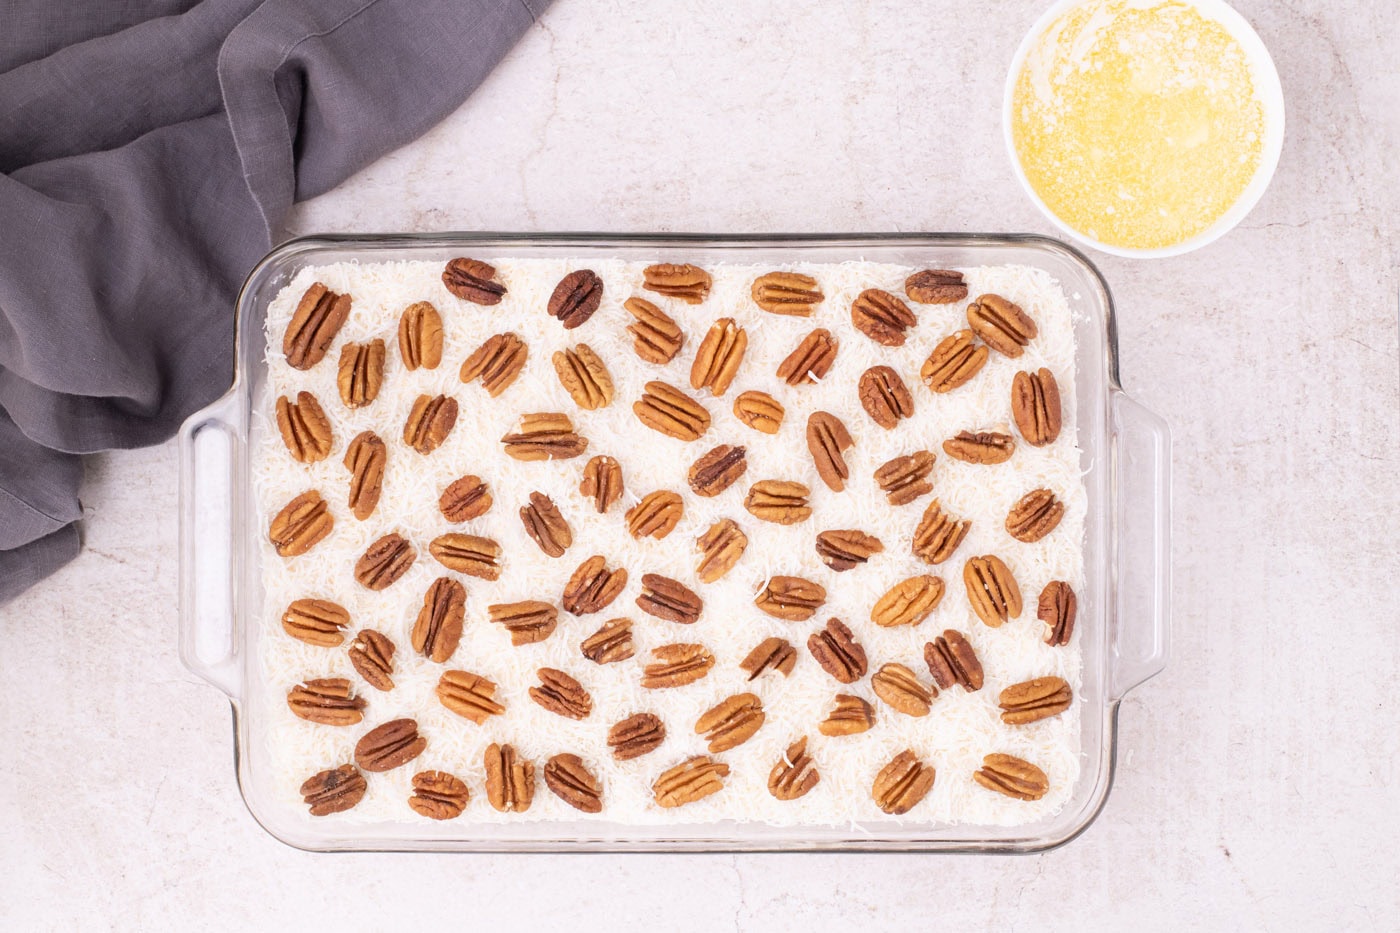 pecans on top of shredded coconut and dump cake mix in a baking dish